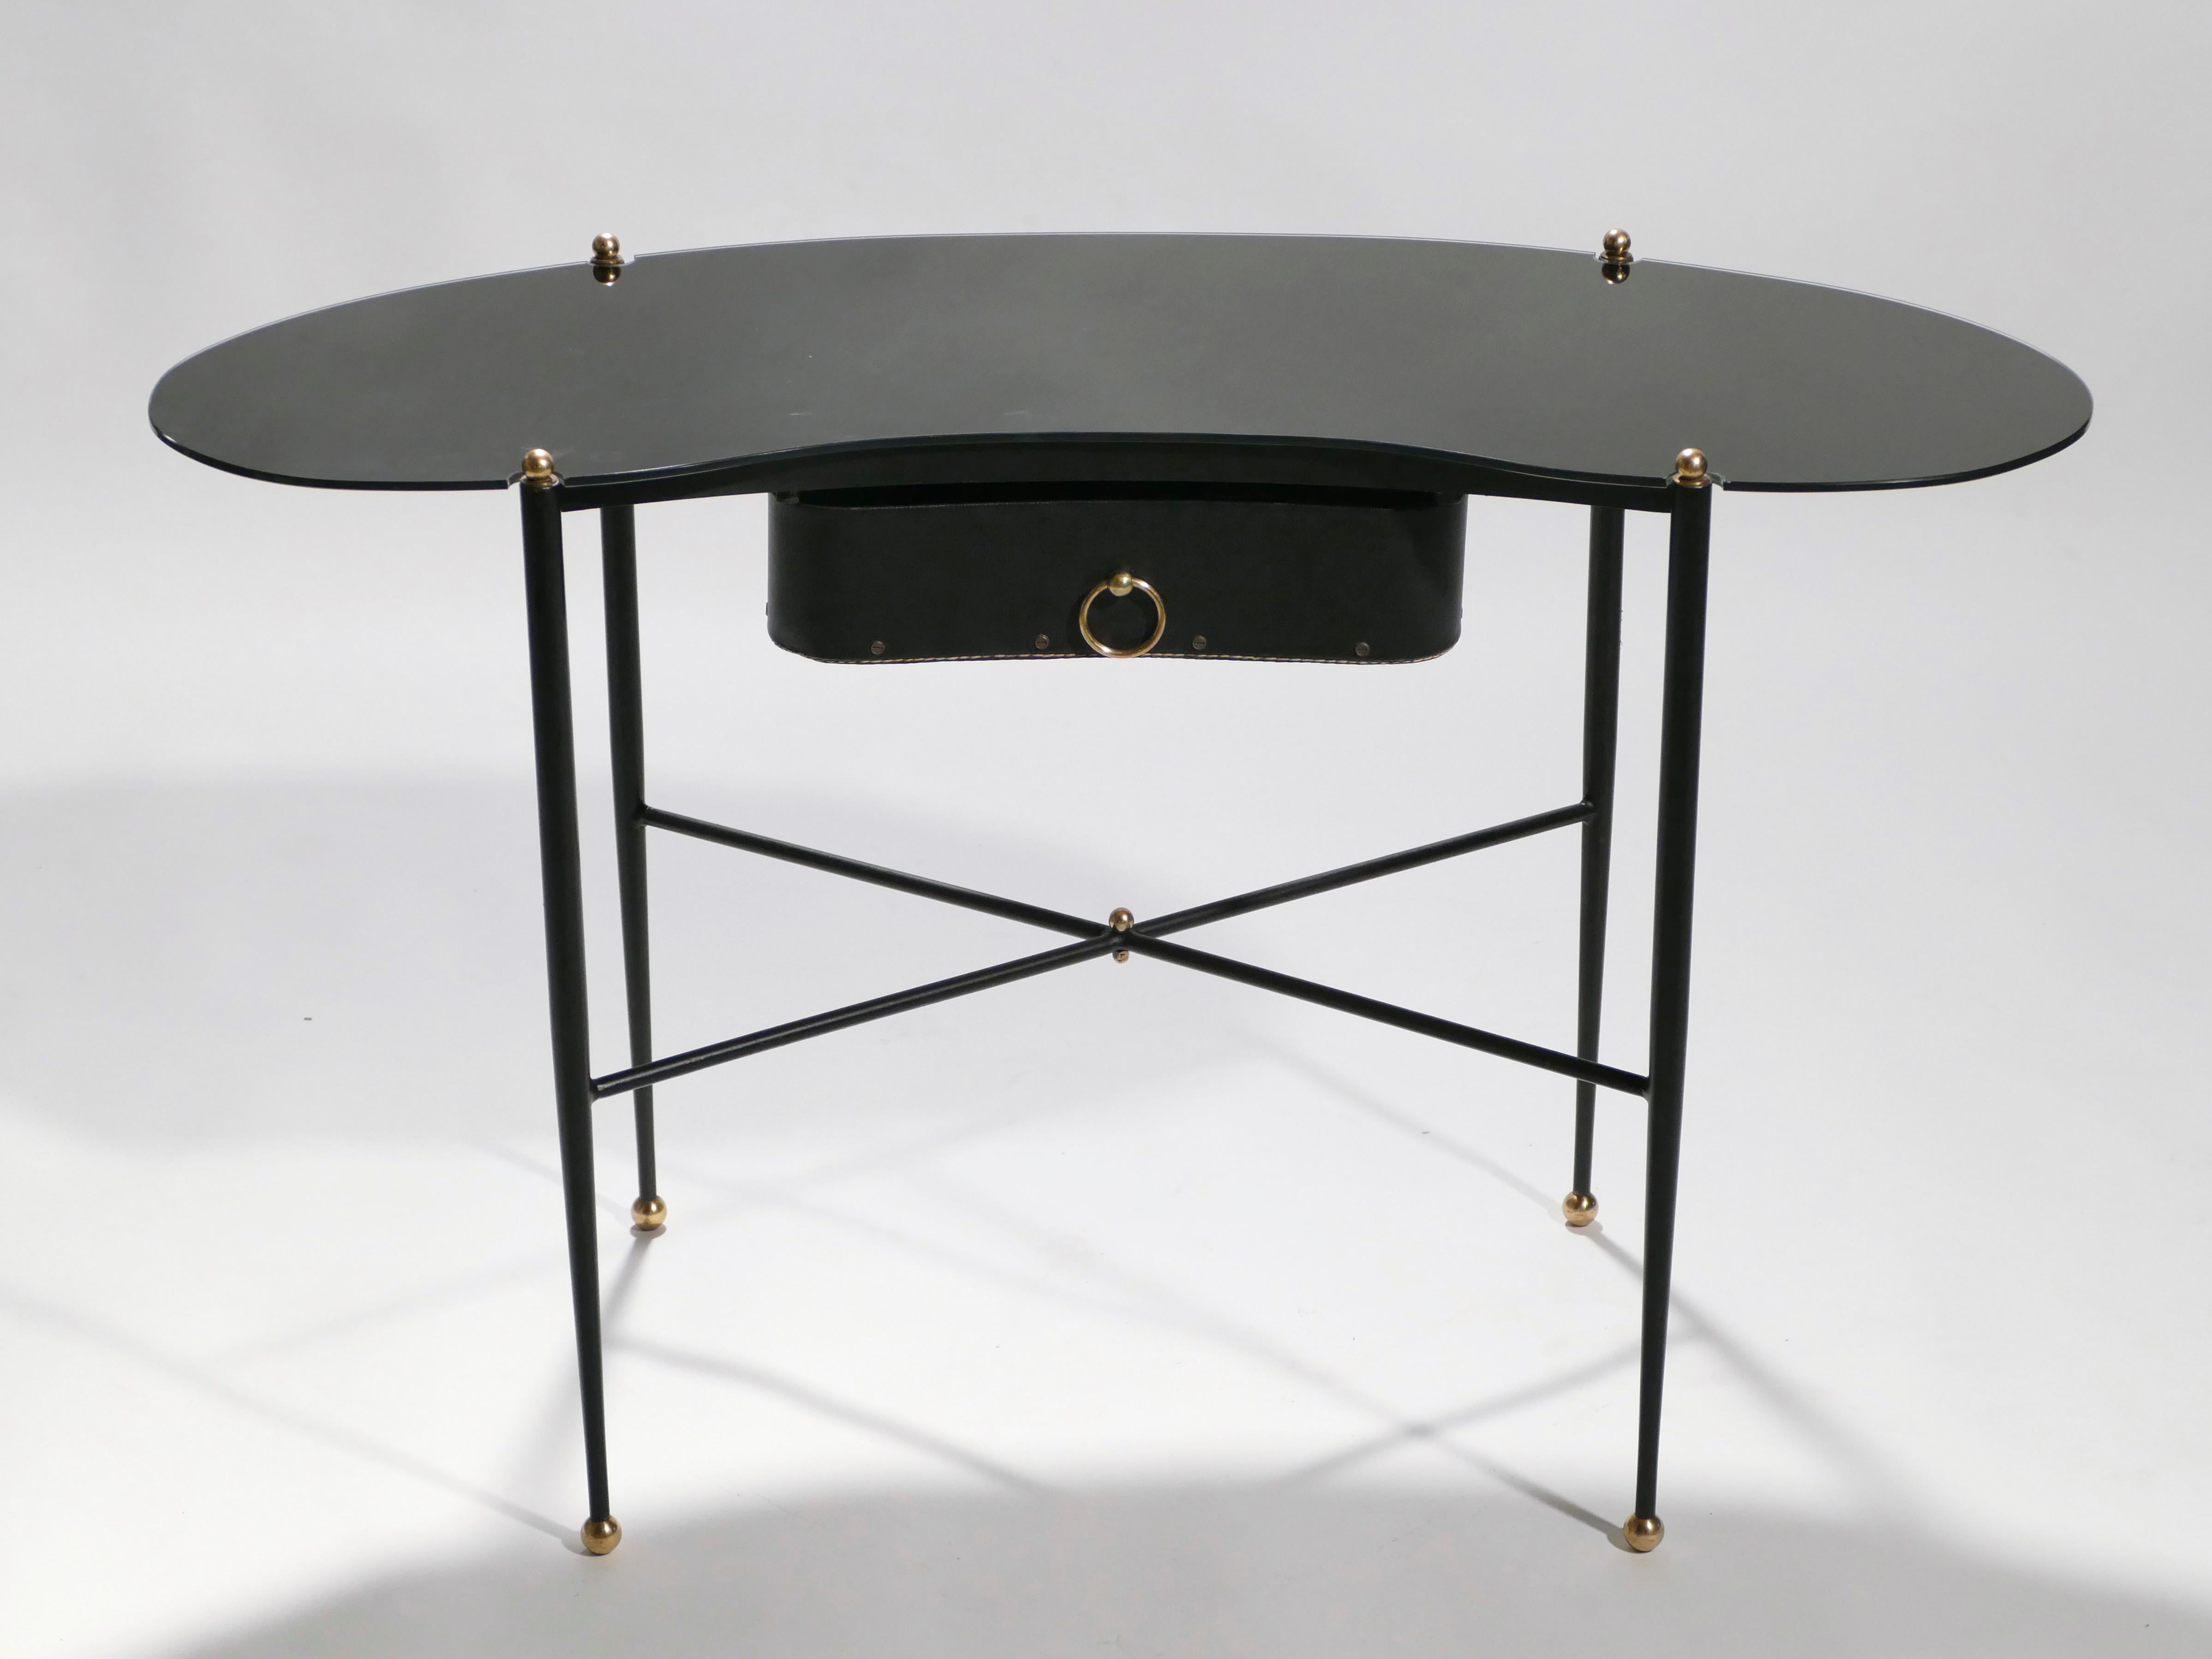 This vanity desk and stool set are rendered in monochromatic black, created by black metal, black opaline, and black piqué sellier (saddle stich) leather. The sleek look is interrupted only by small, charming brass accents—an Apt choice to both